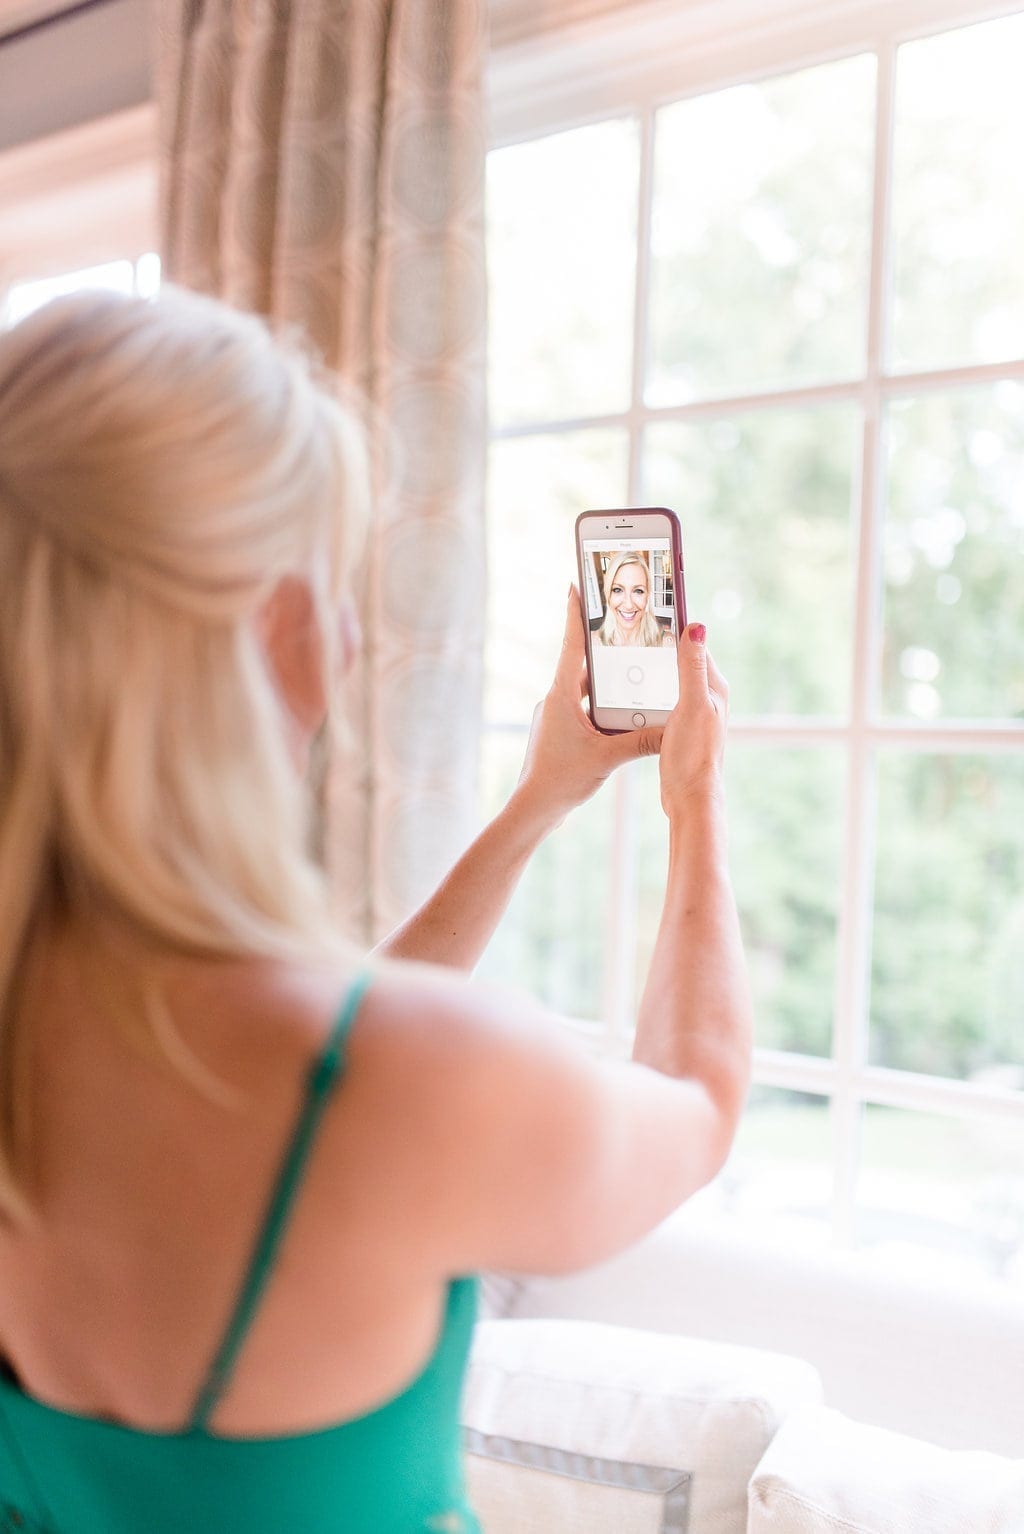 Trying to taking a good selfie? Lifestyle blogger, bluegraygal, teaches you how to take a great selfie with easy tips!